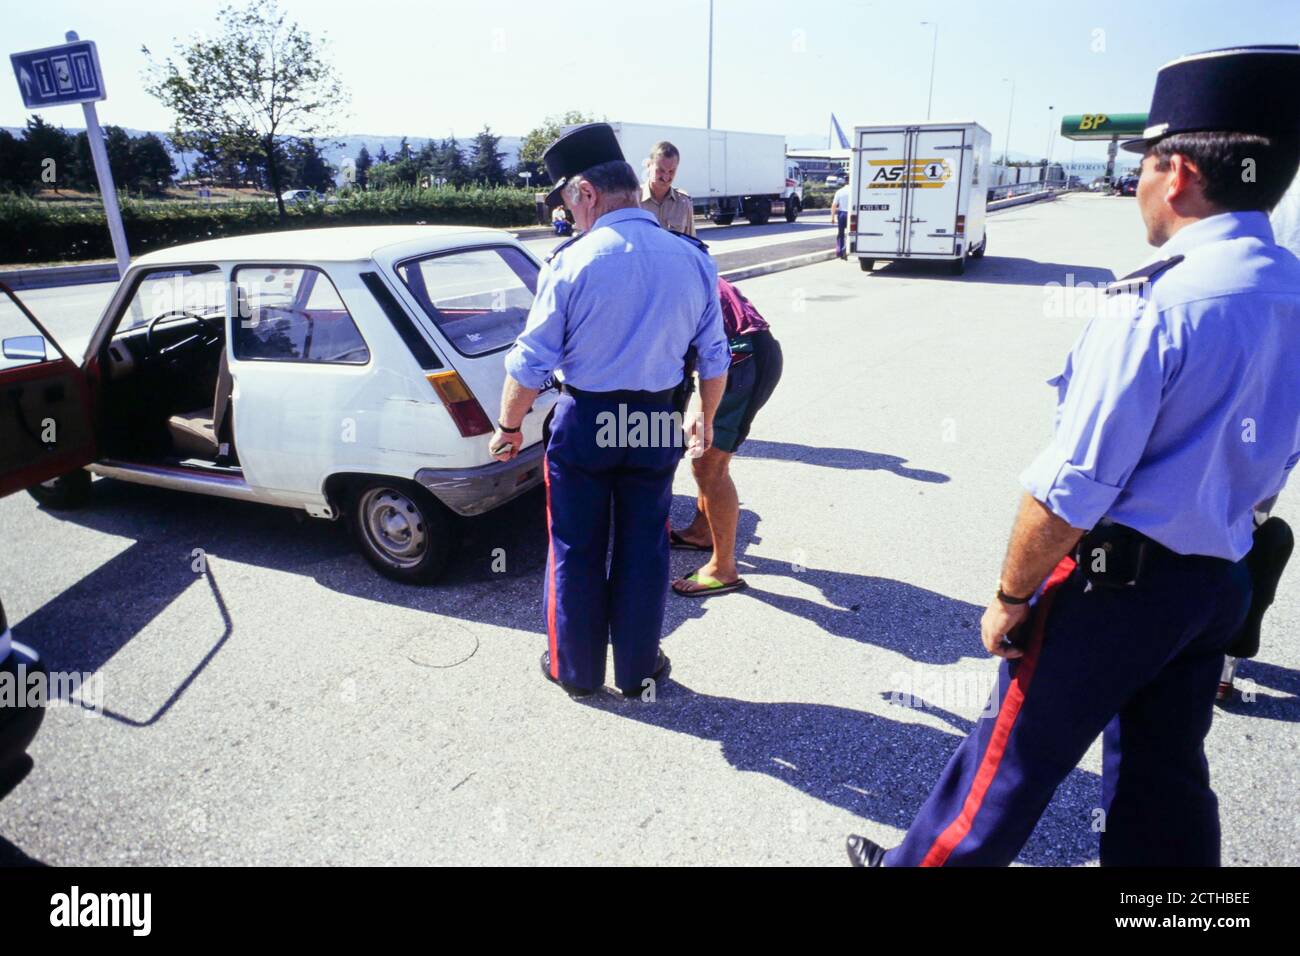 French Customs Officers drug control inspection on A7 motorway, Rhone Valley, France Stock Photo